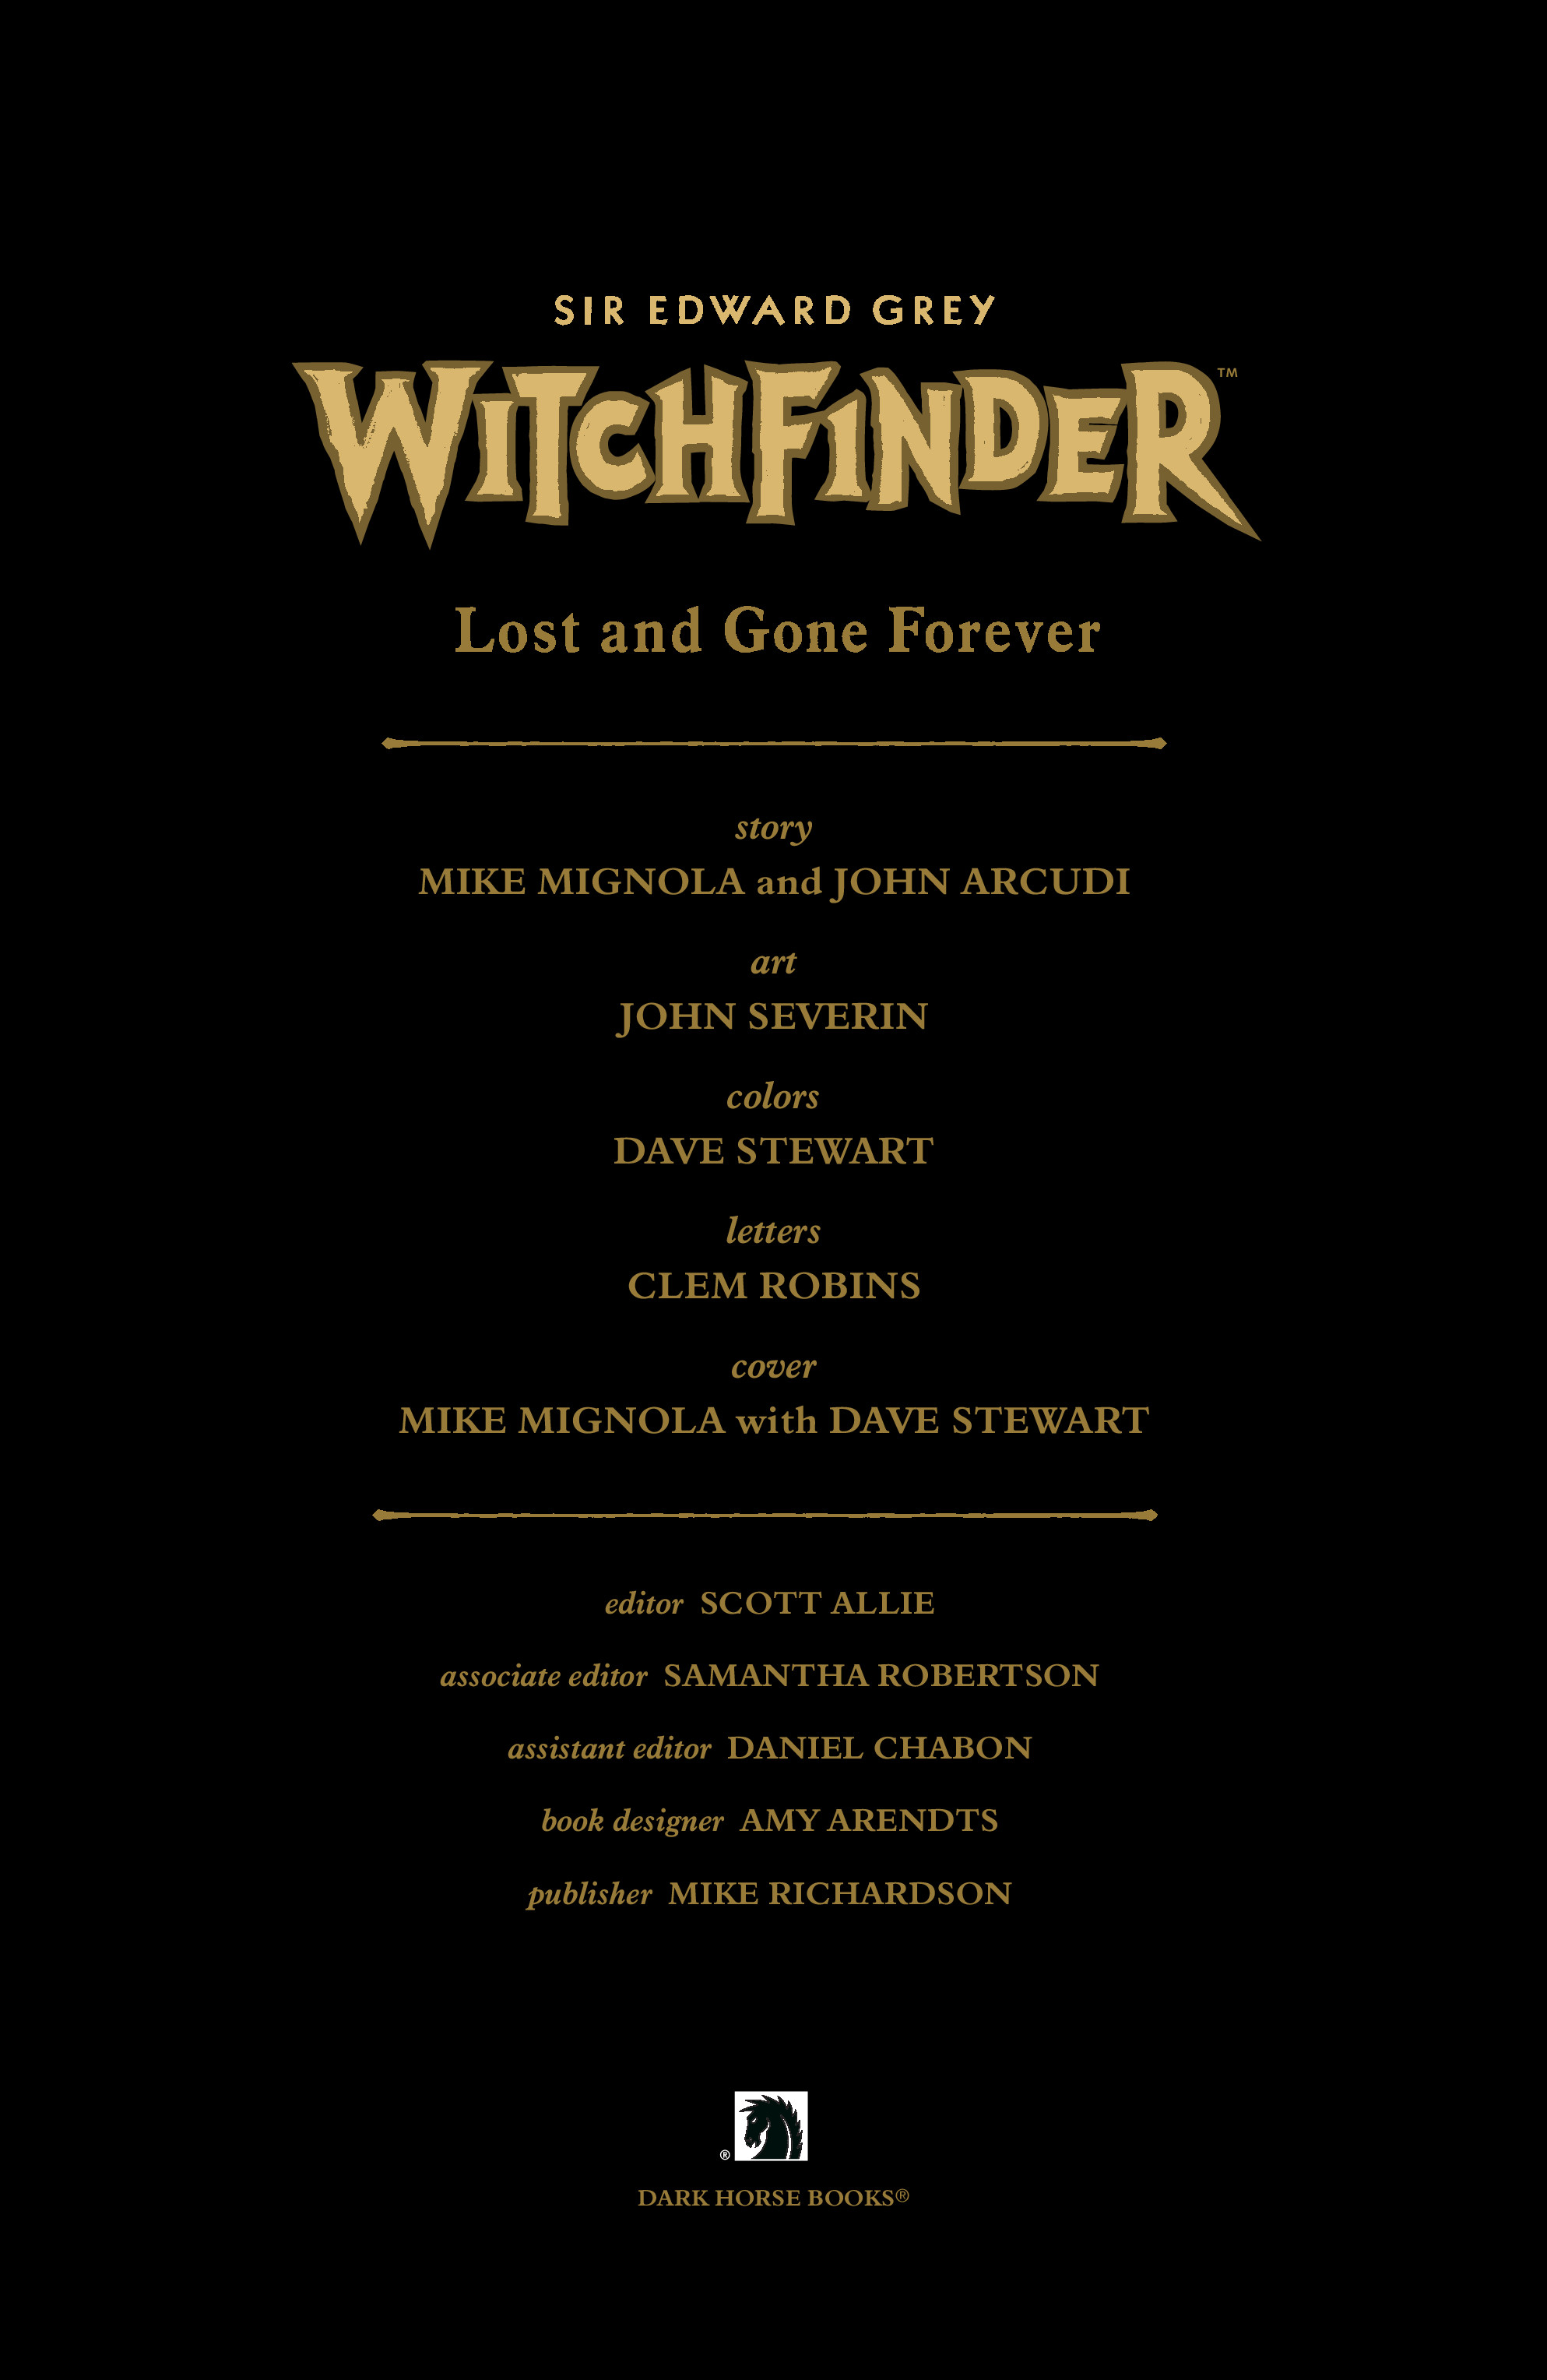 Read online Sir Edward Grey, Witchfinder: Lost and Gone Forever comic -  Issue # TPB - 5